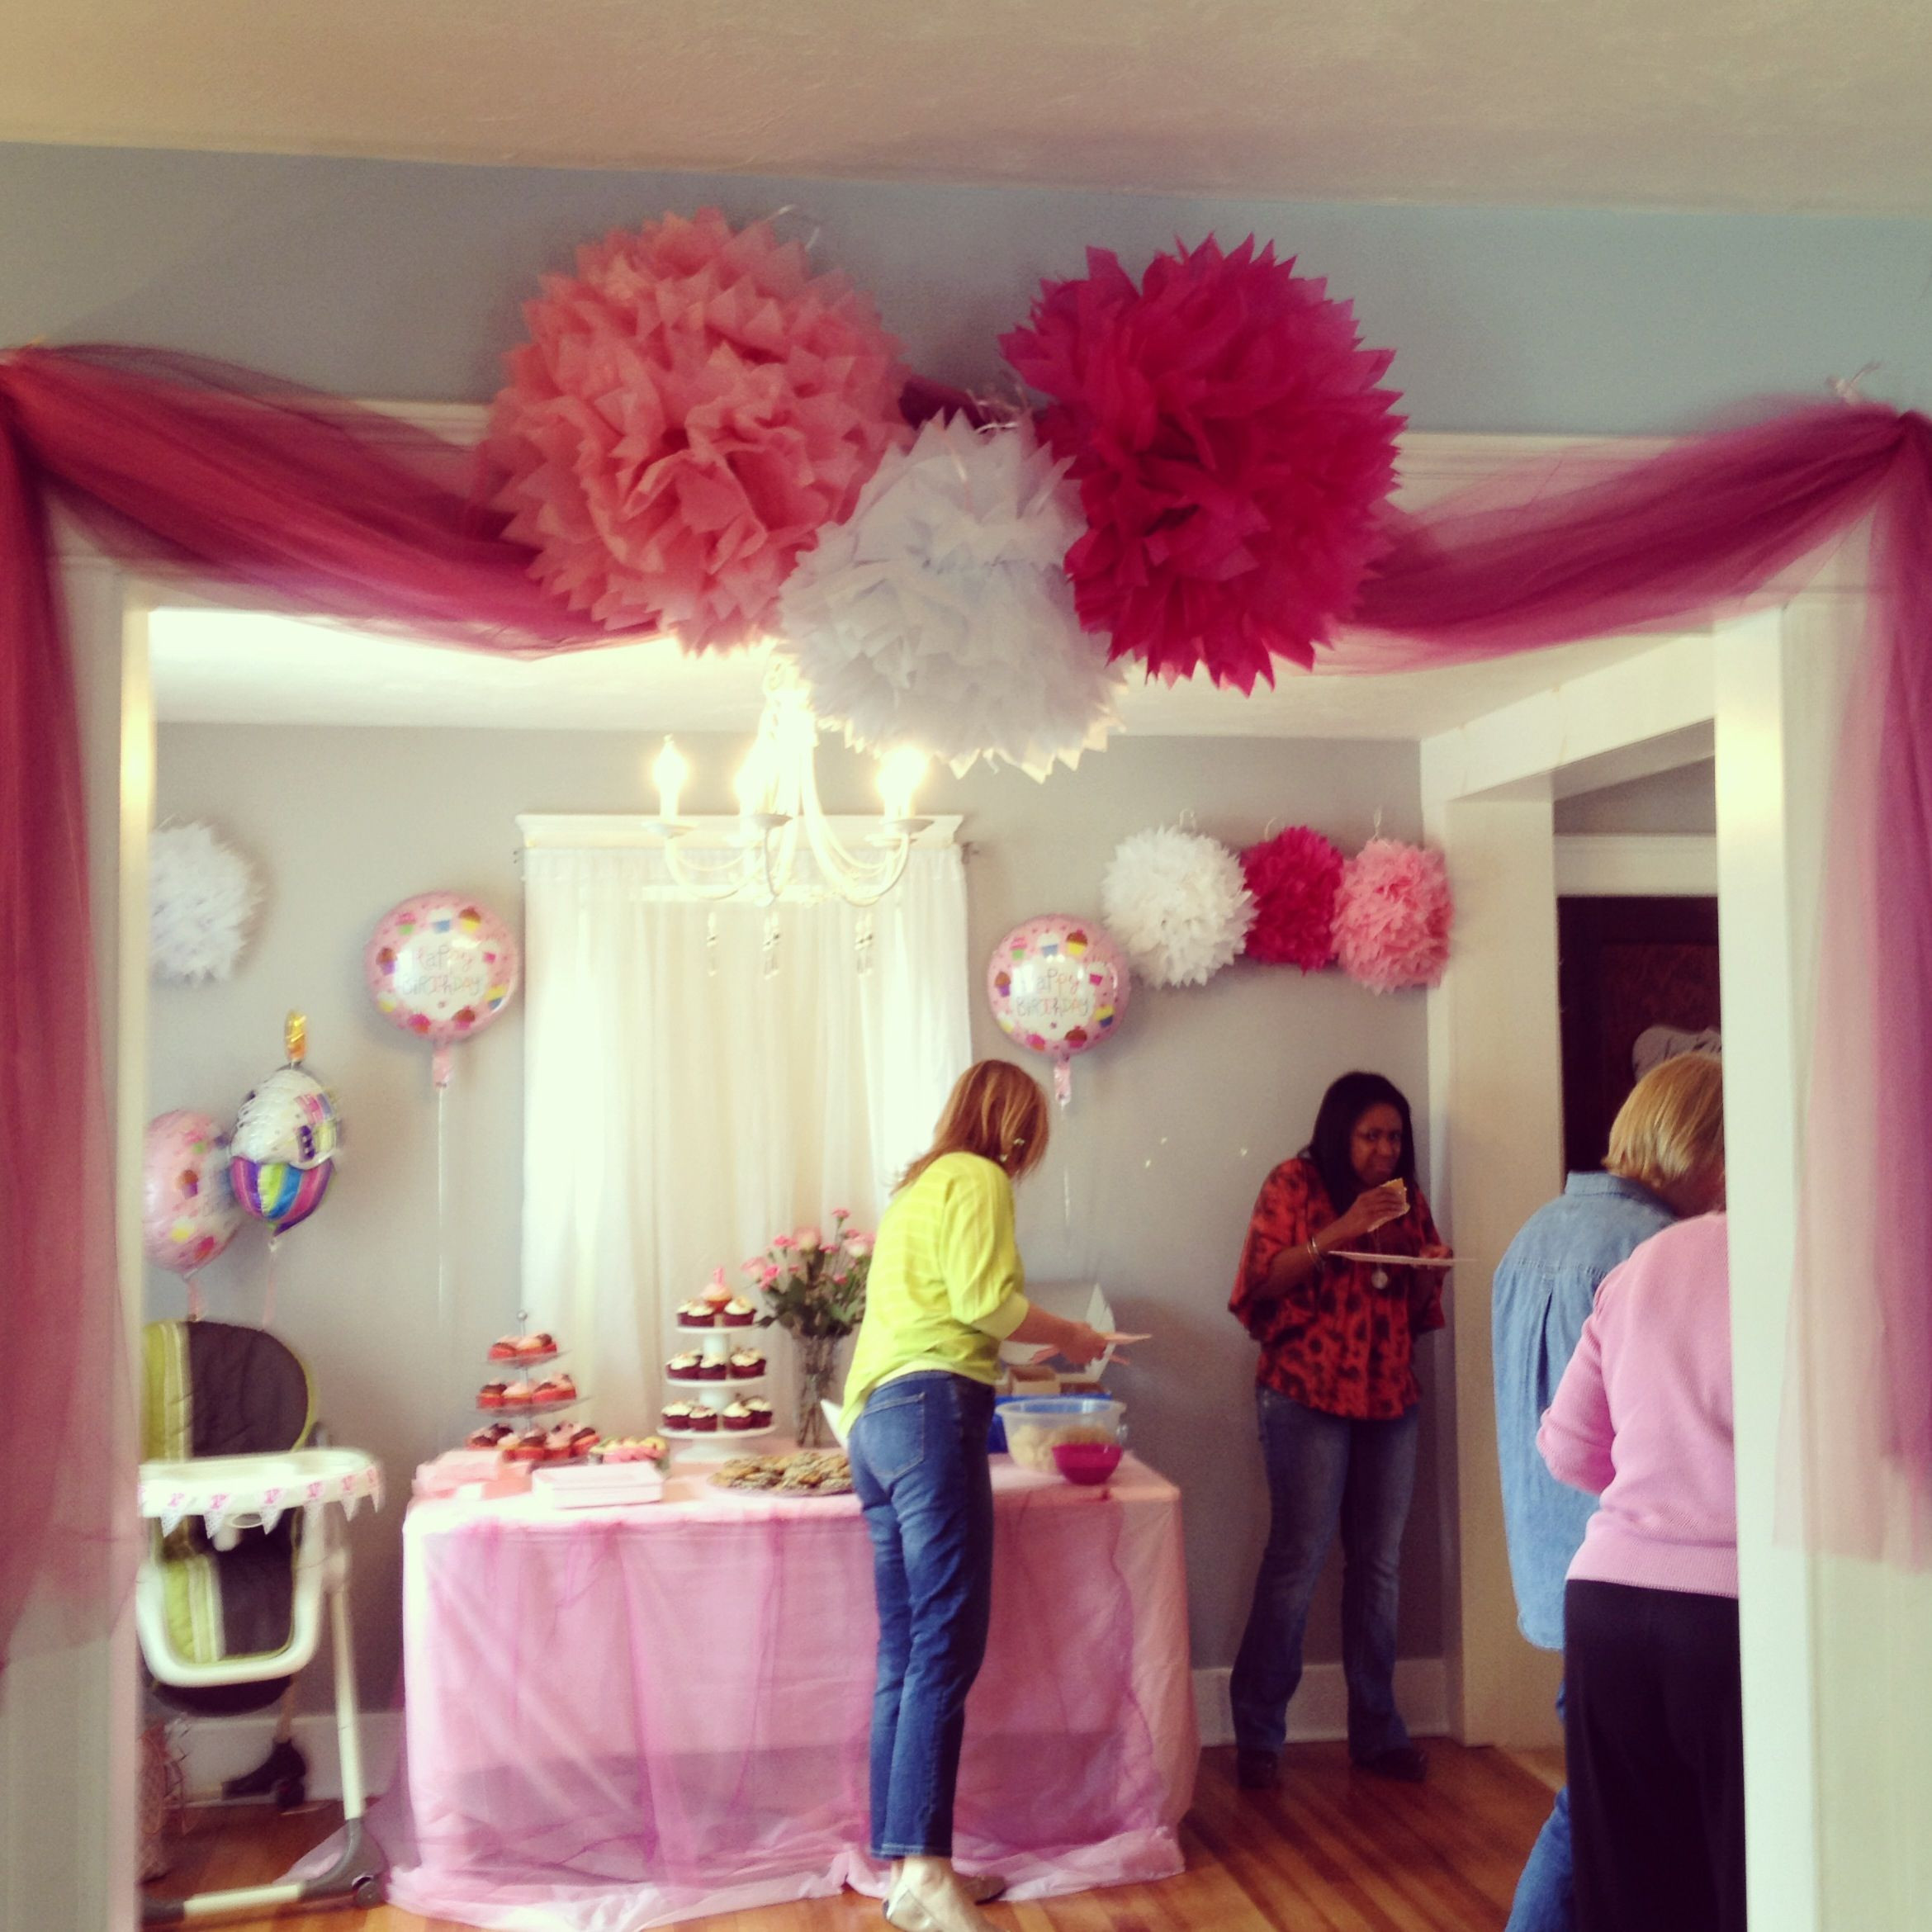 How To Decorate Birthday Party At Home
 Brid te s 1st birthday party decorations Pink Tutu